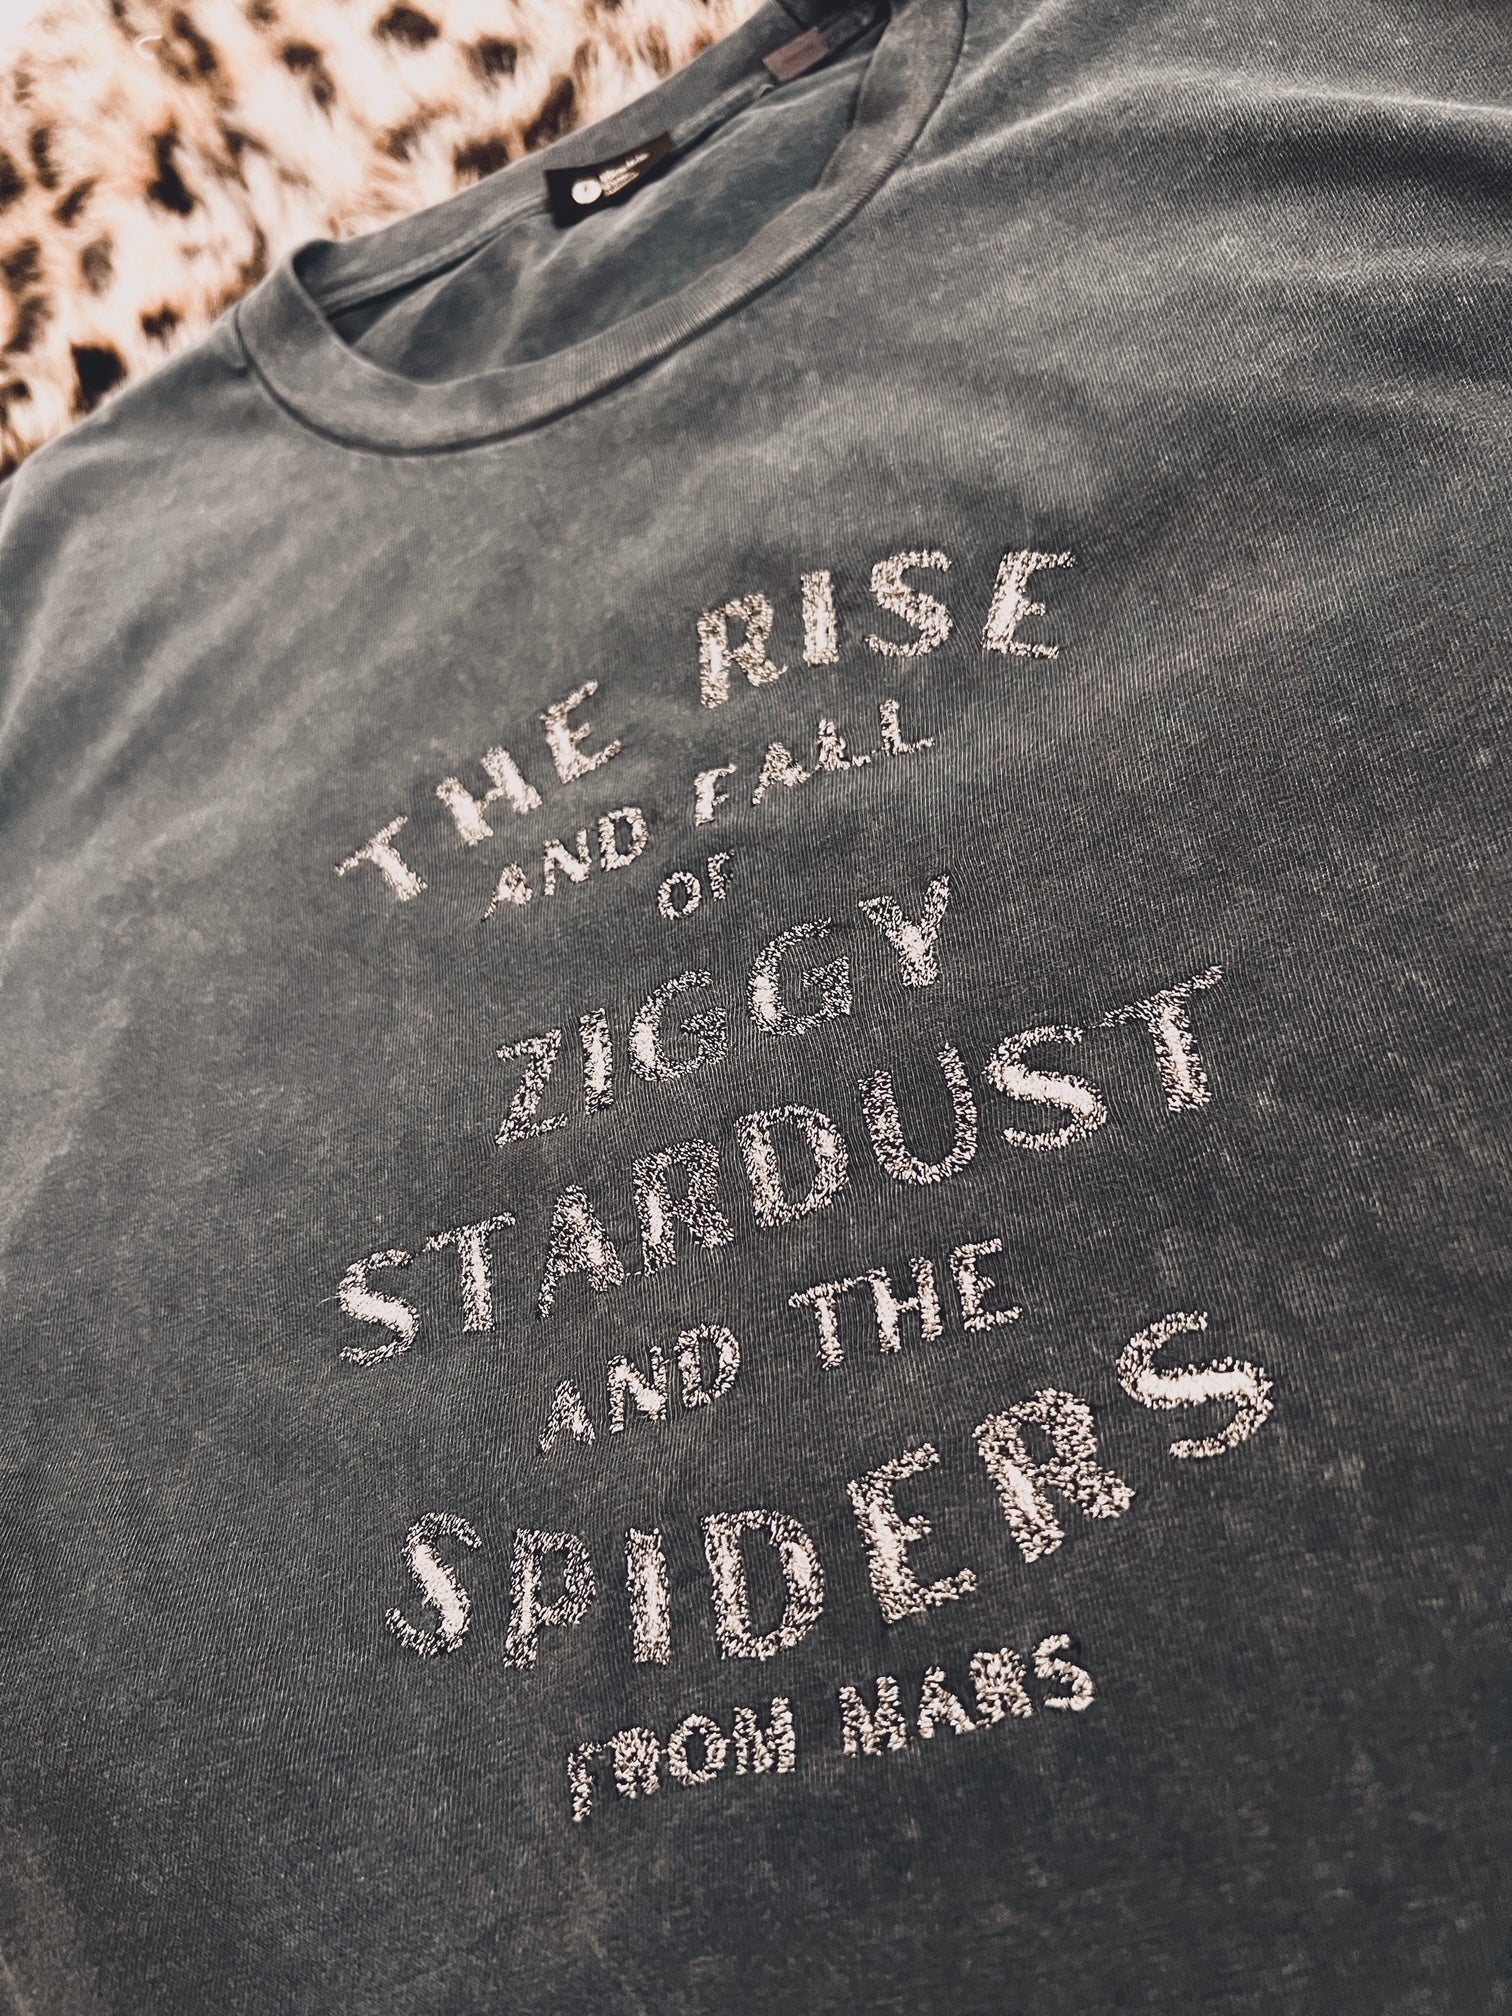 'THE RISE AND FALL OF ZIGGY STARDUST AND THE SPIDERS FROM MARS’ EMBROIDERED UNISEX VINTAGE GARMENT DYED ORGANIC COTTON T-SHIRT